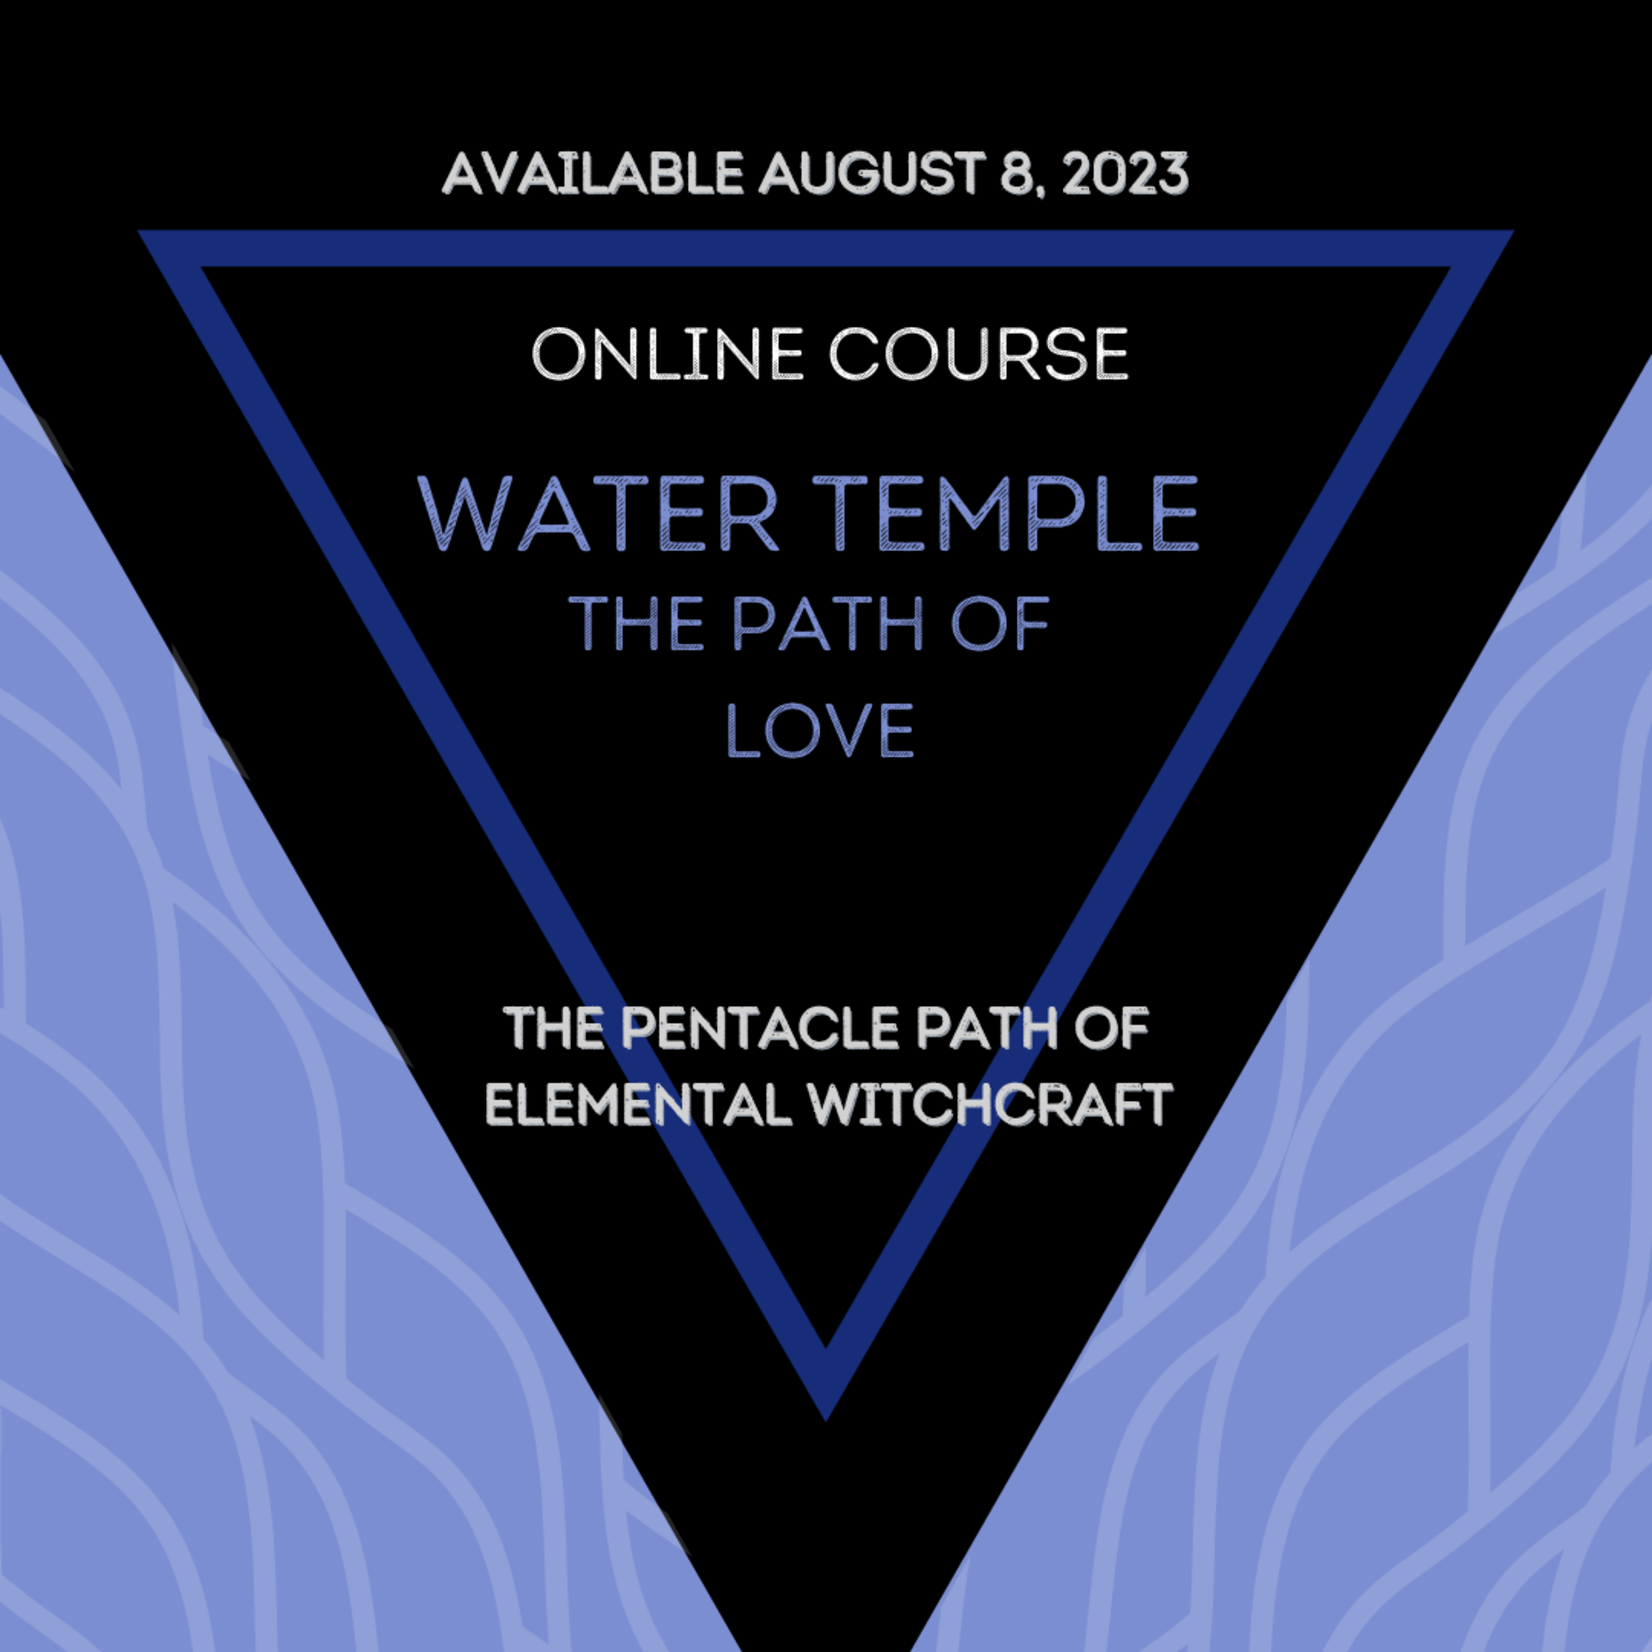 Pentacle Path of Elemental Witchcraft - Online Course, Pay In Full Option